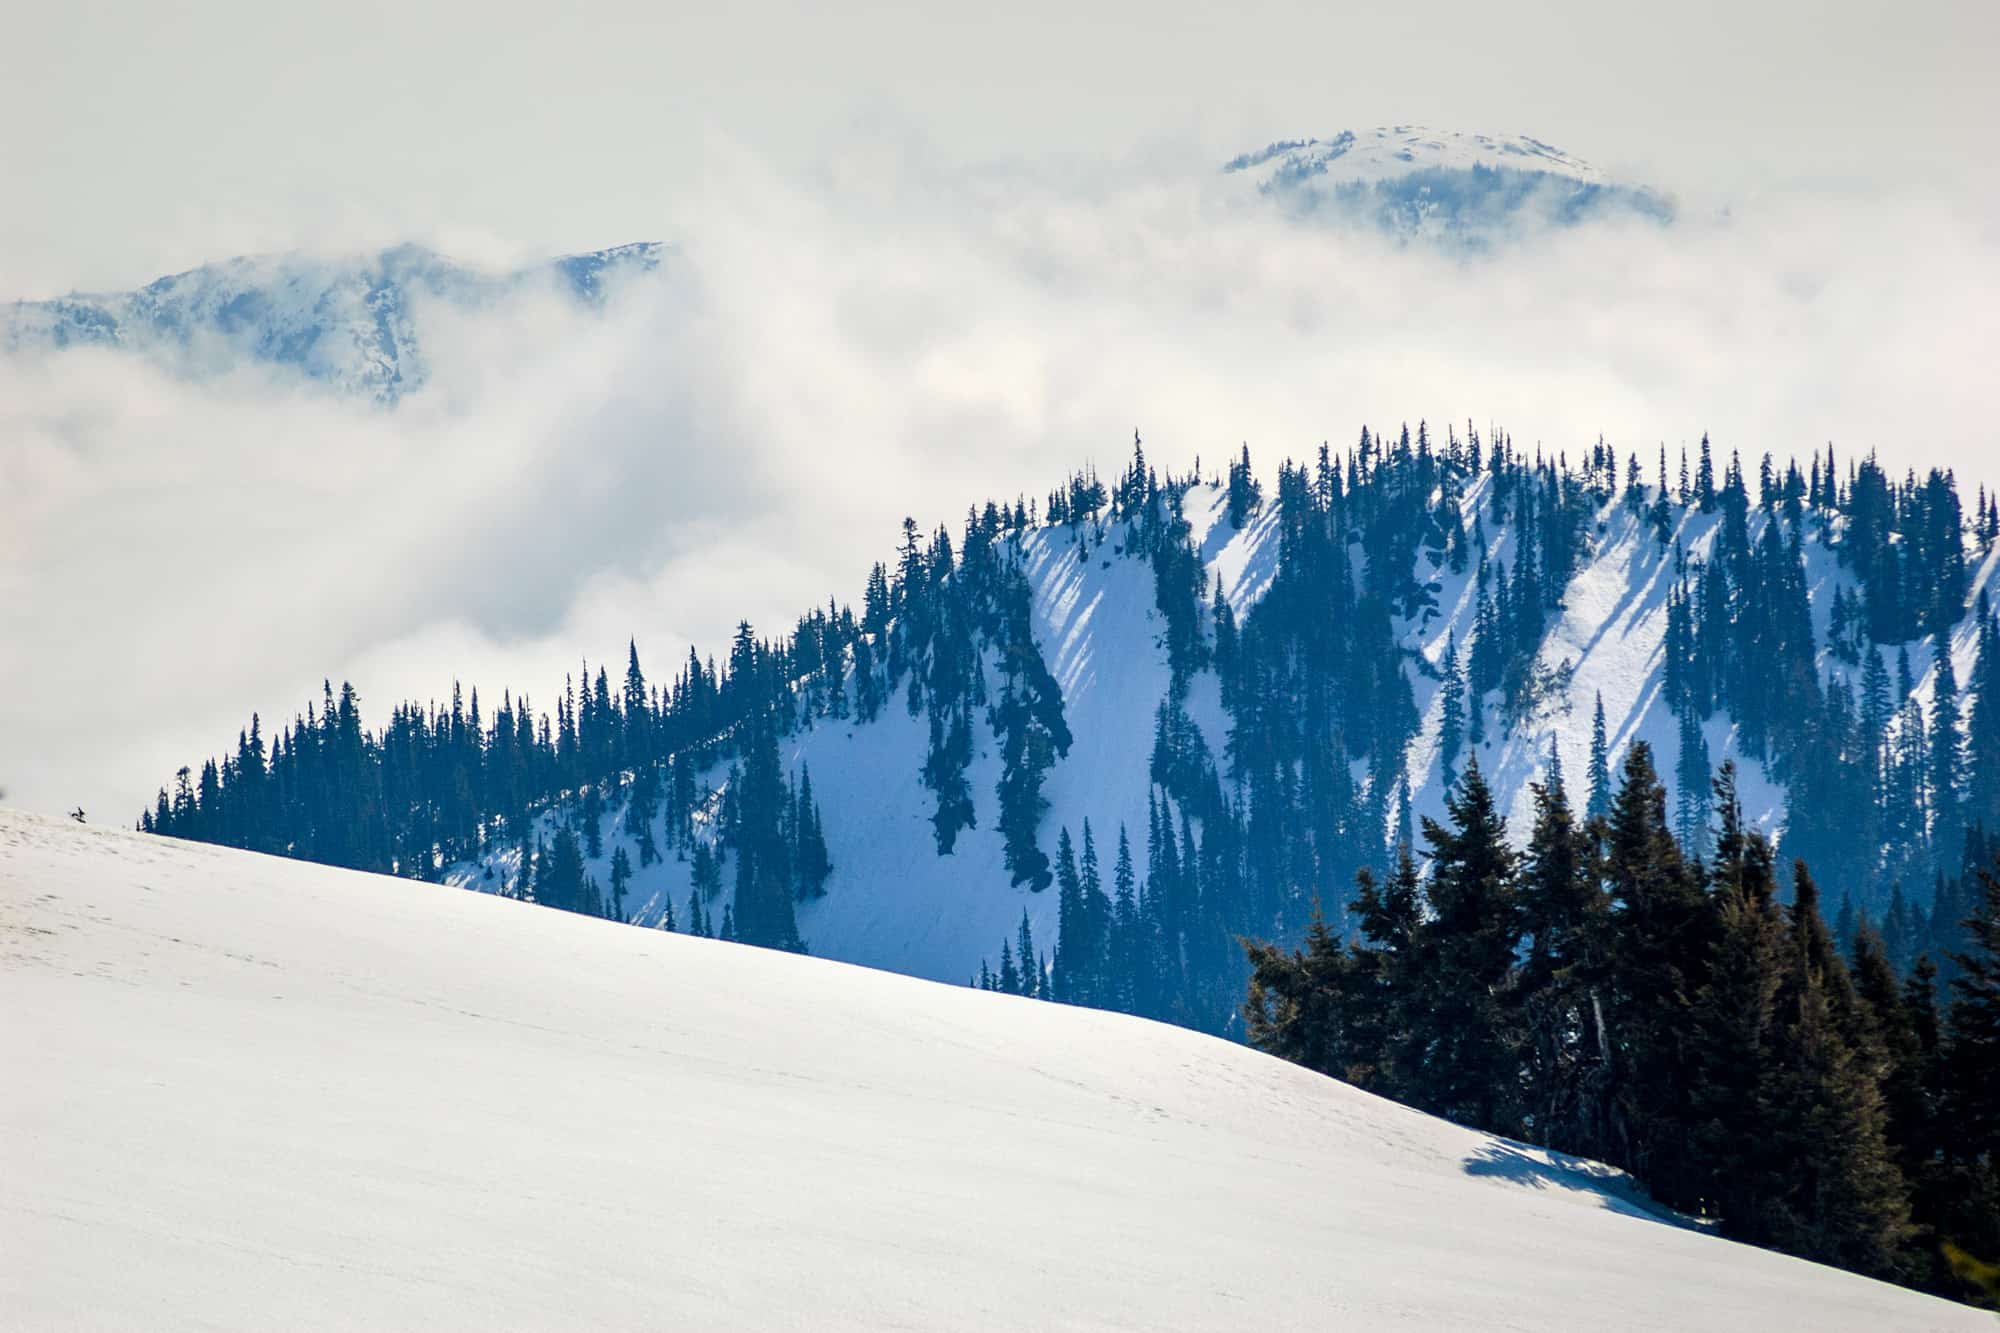 hurricane ridge covered in snow with snowy mountain backdrop at olympic national park in winter